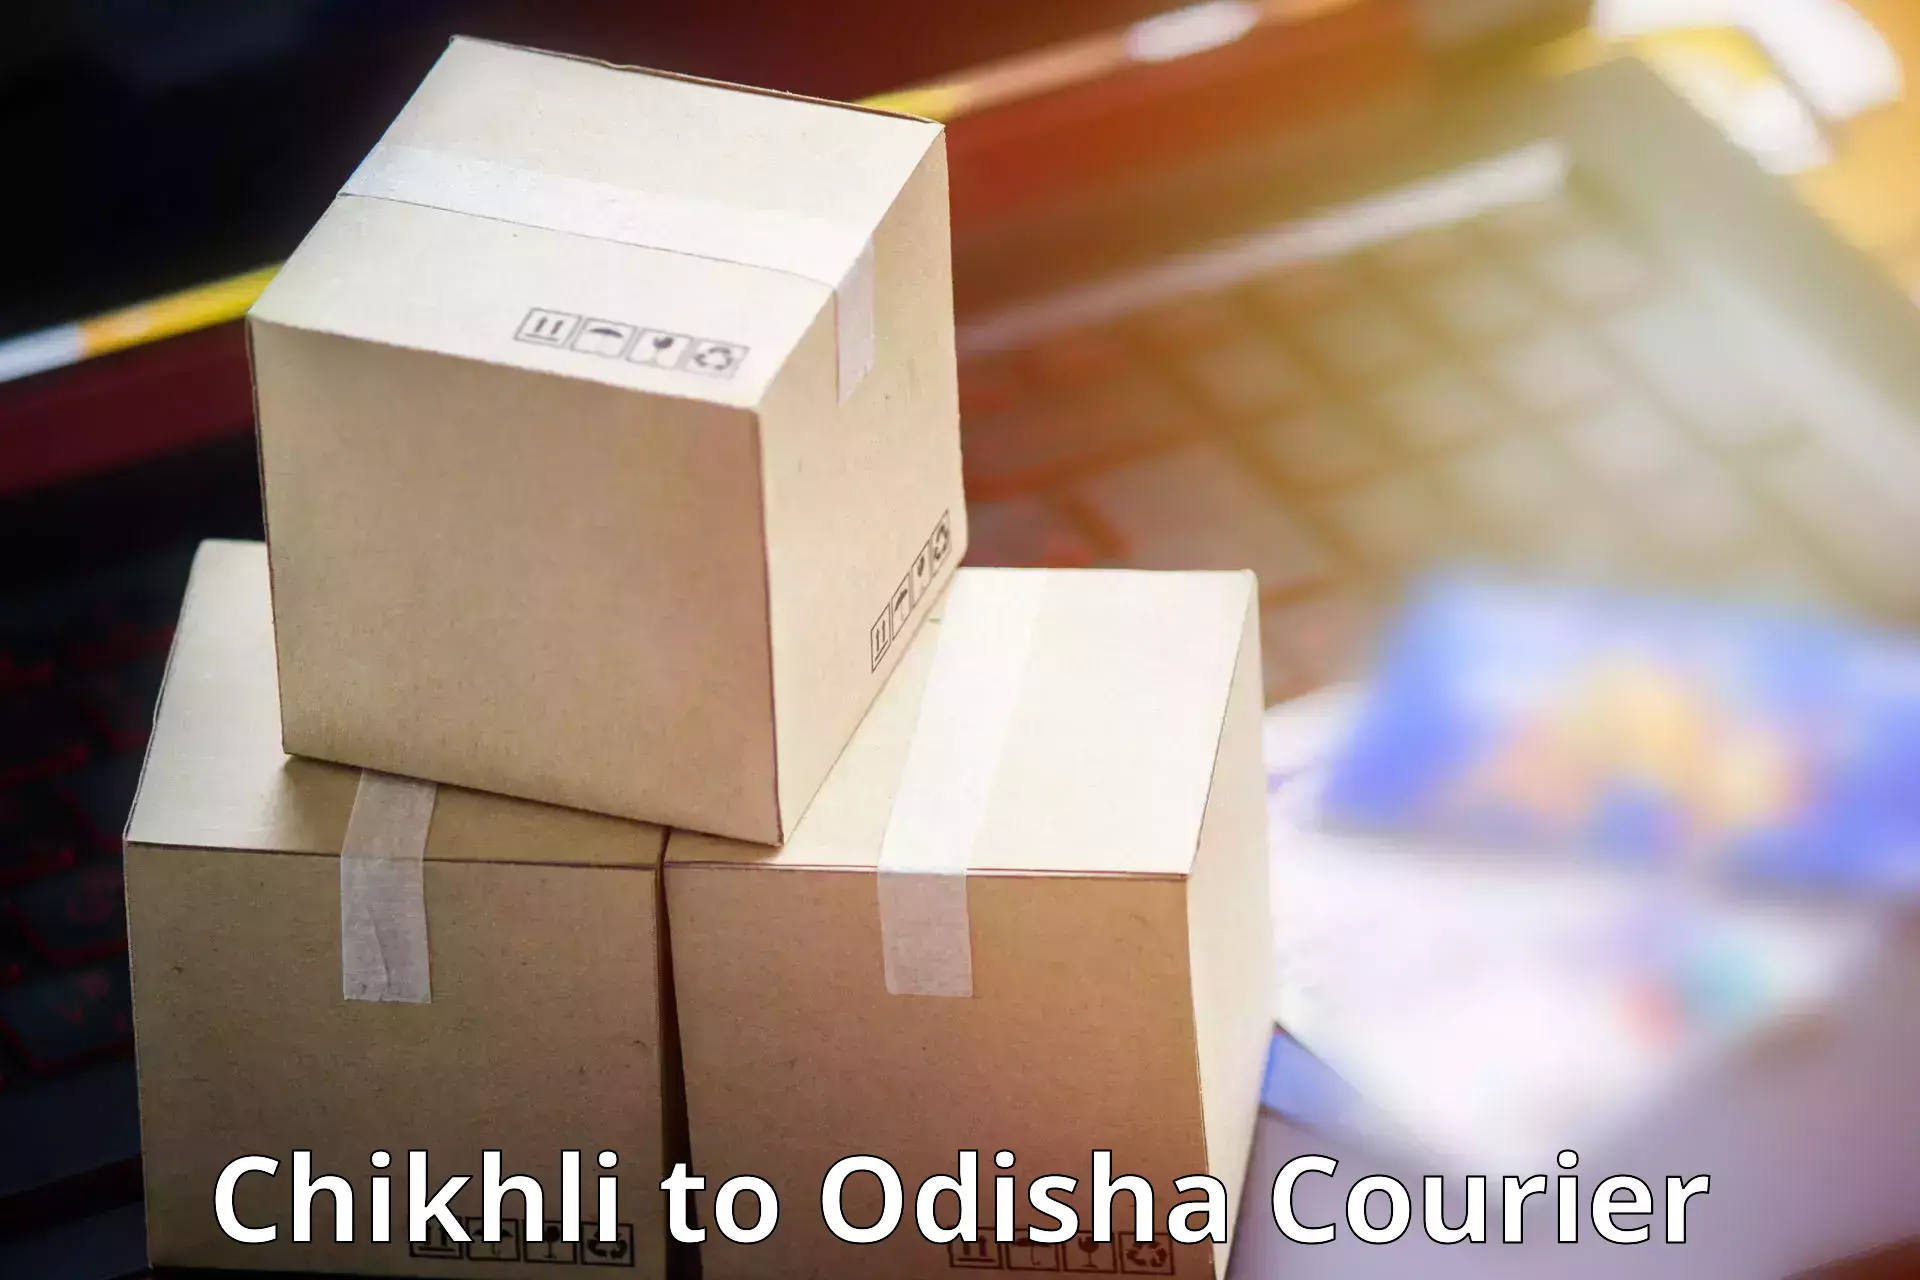 Cost-effective courier options Chikhli to Paradip Port